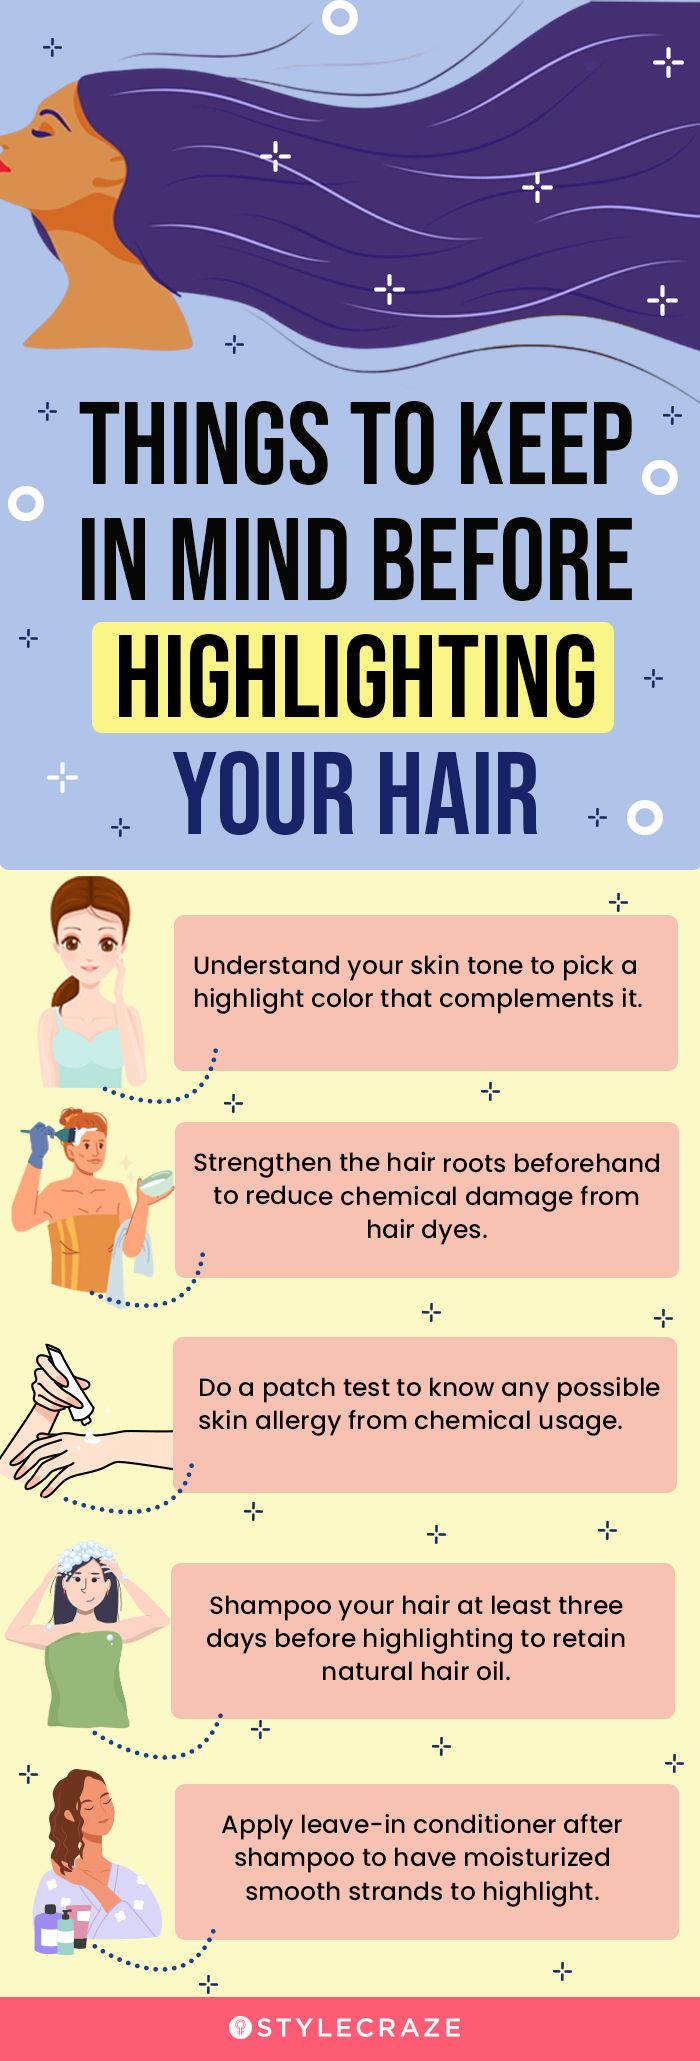 things to keep in mind before highlighting your hair [infographic]